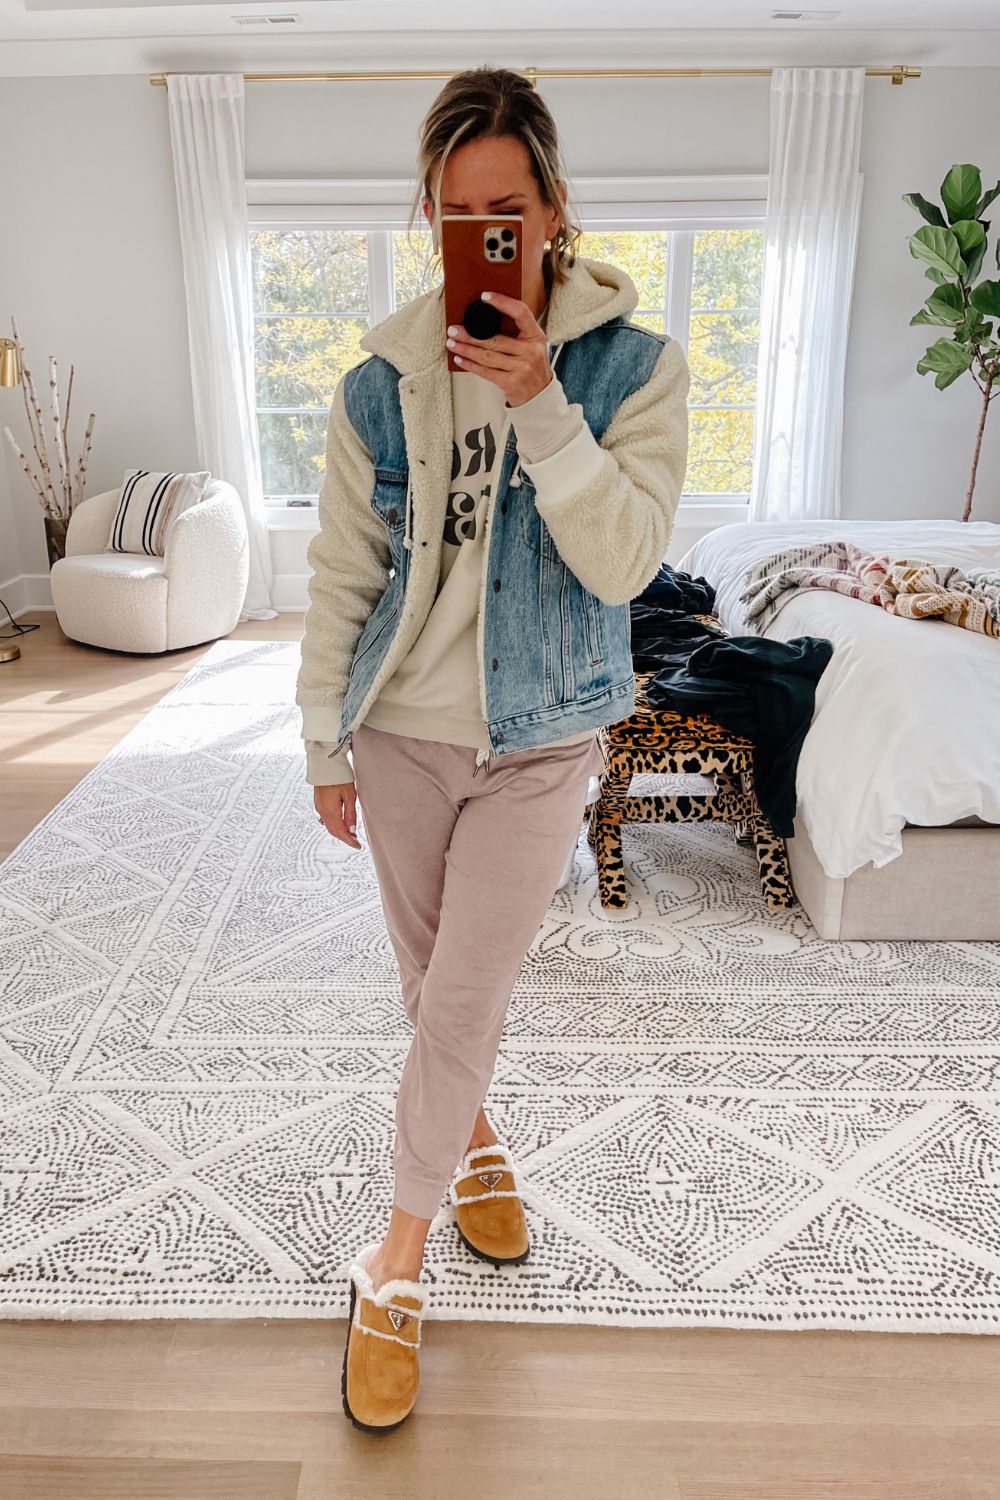 Suzanne wearing a Pro Roe crewneck, joggers, and a denim sherpa jacket